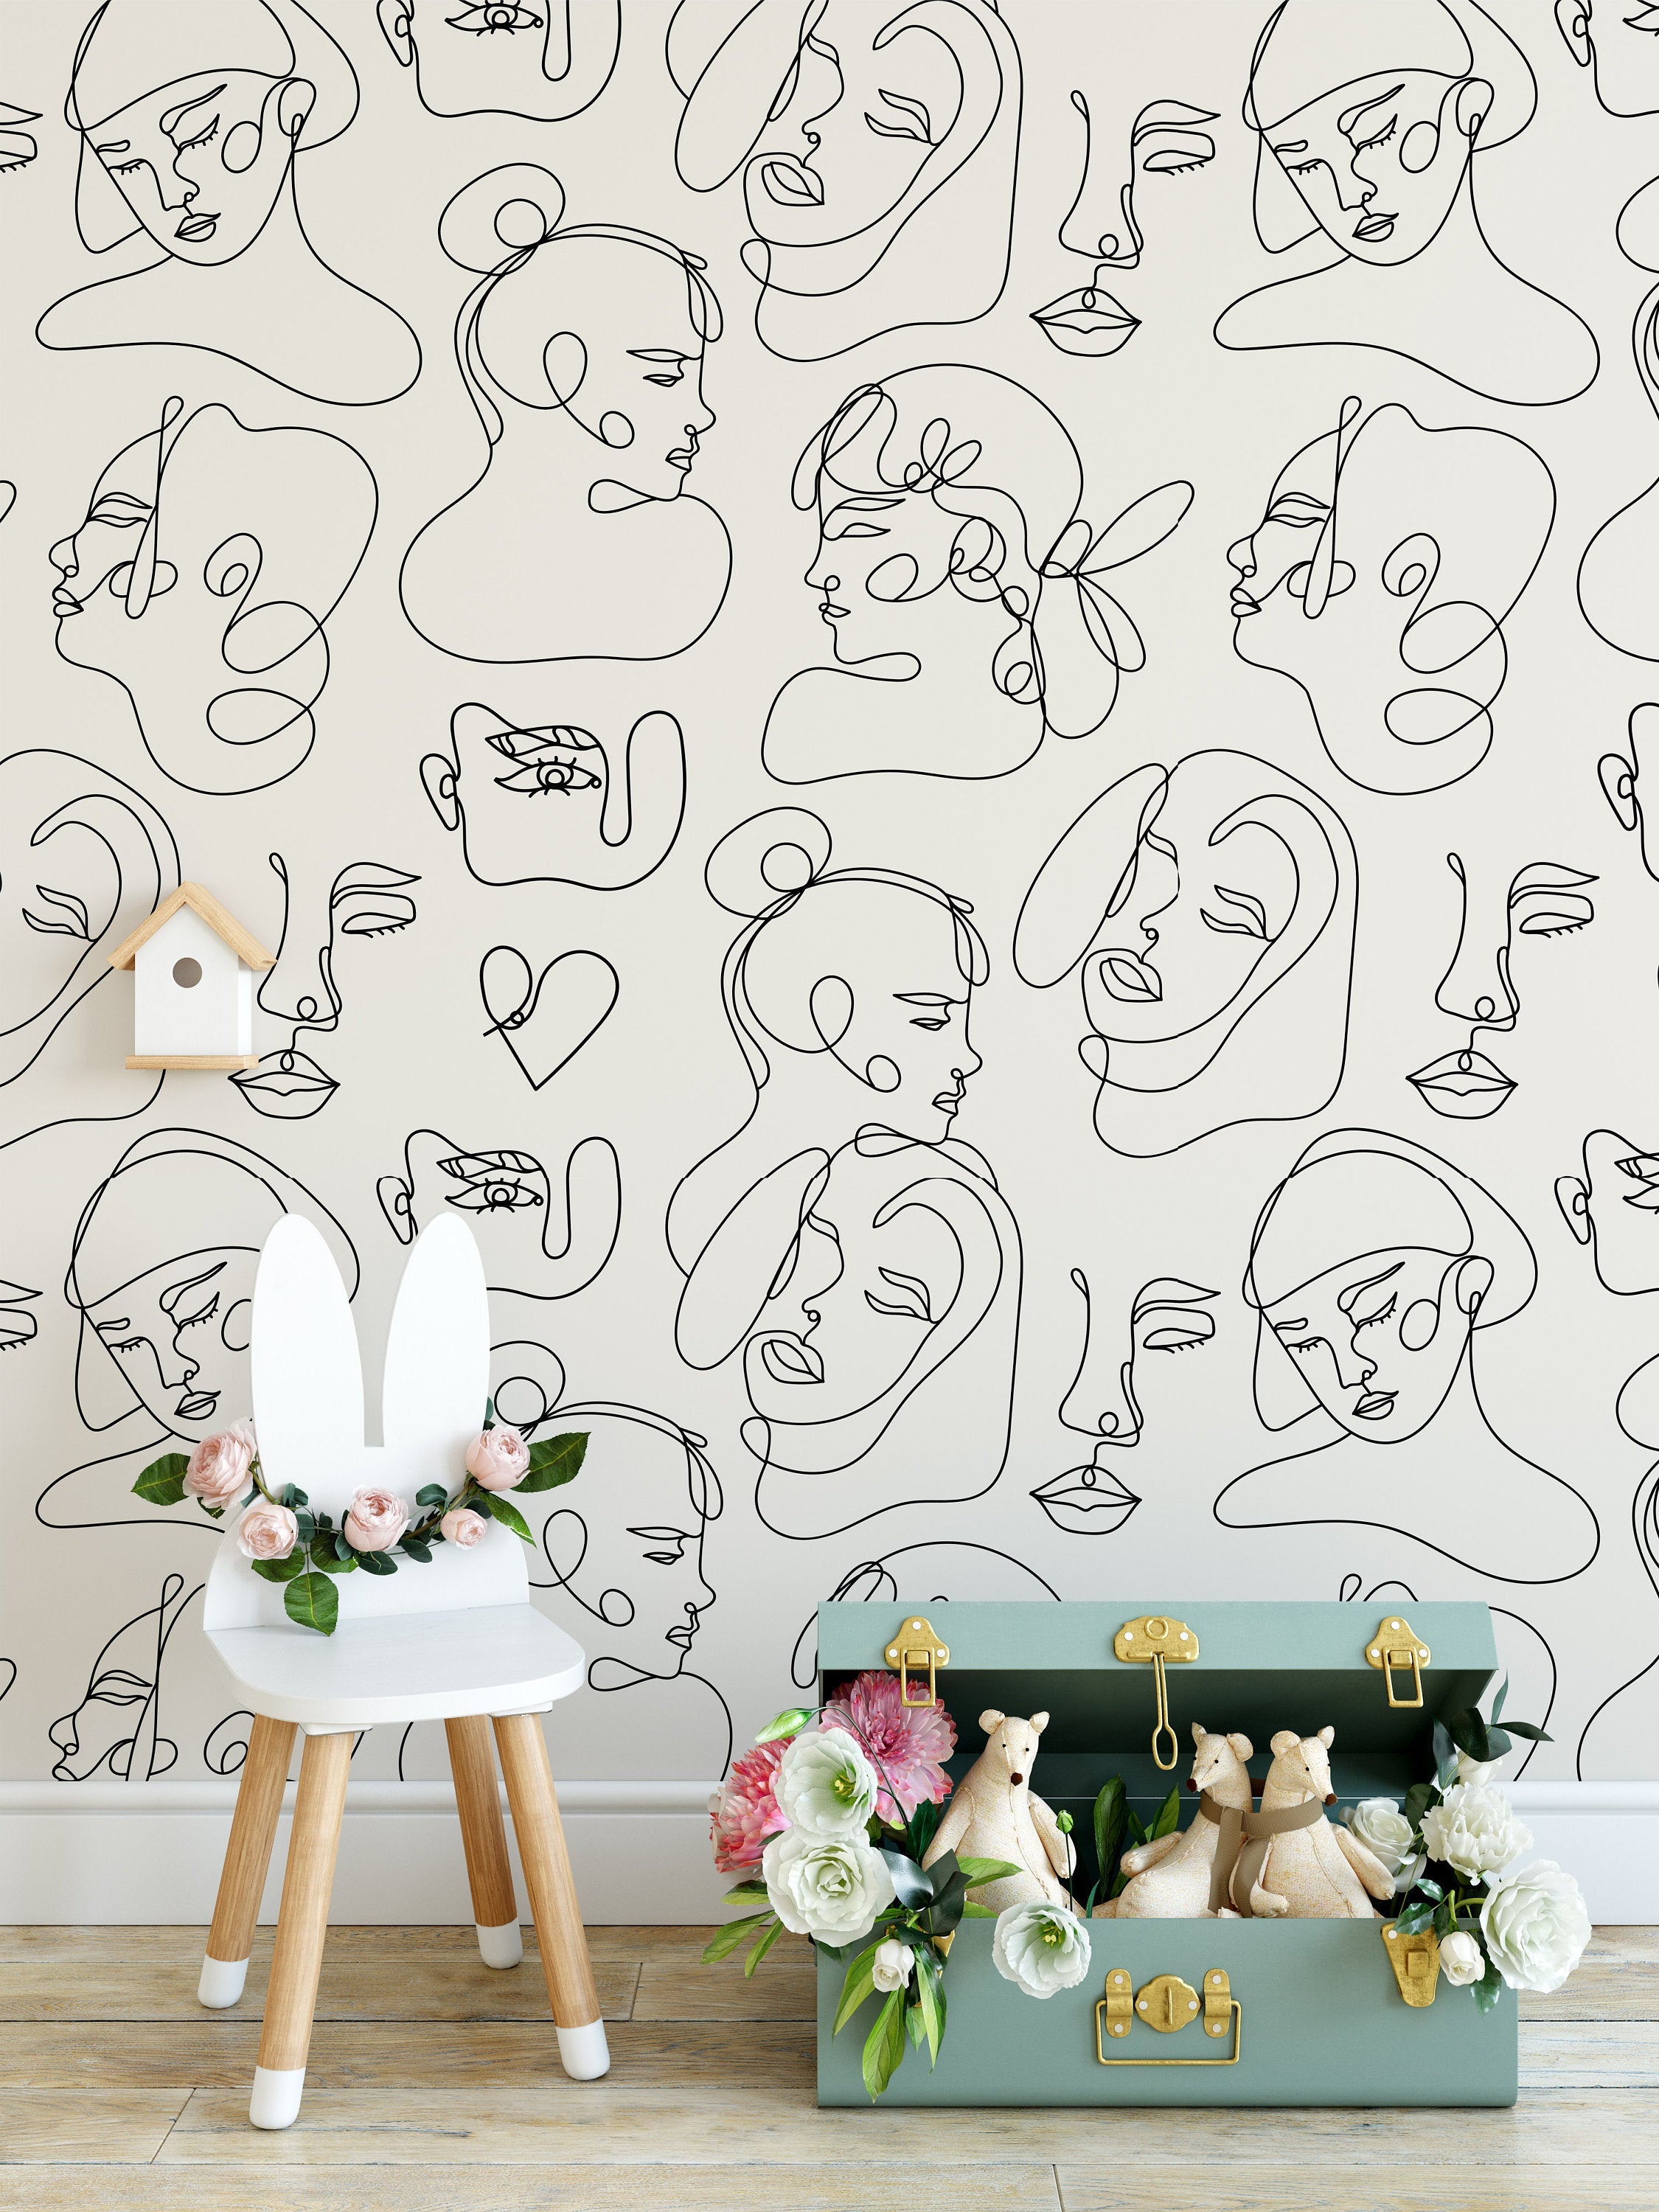 Modern Abstract Faces Contemporary Female Silhouettes Background Wallpaper Bedroom Children Kids Room Mural Home Decor Wall Art